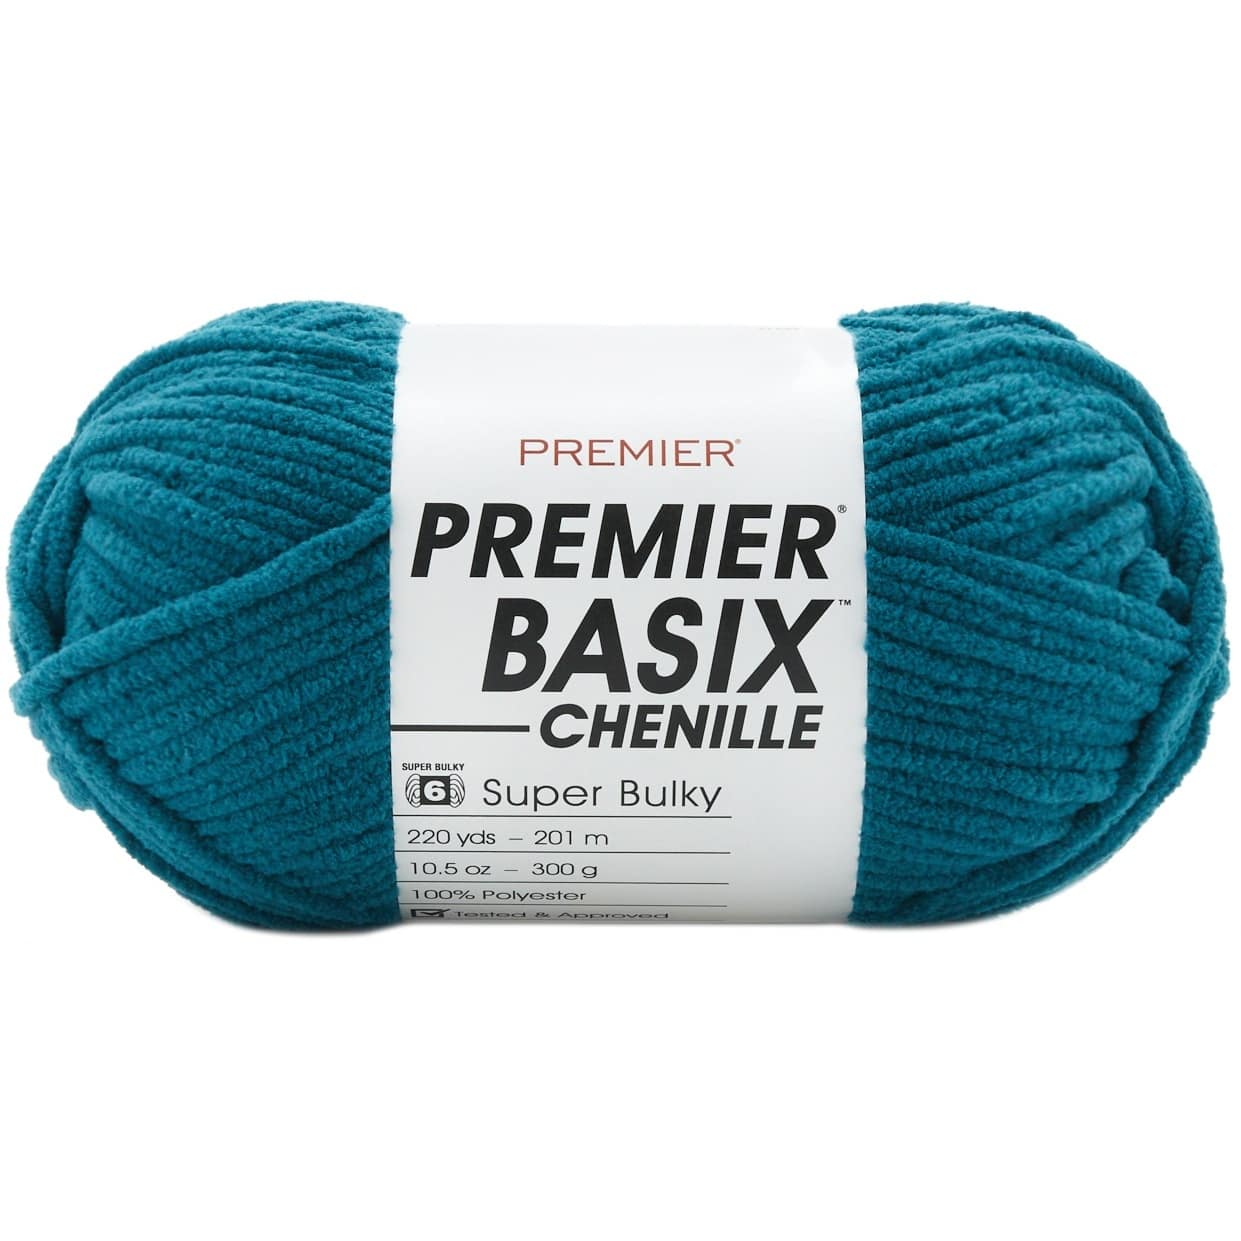 Premier Yarns Basix Chenille Brights Yarn - 5.3 oz - #6 Super Bulky Weight - 3 Pack Bundle with Bella's Crafts Stitch Markers (Fog)